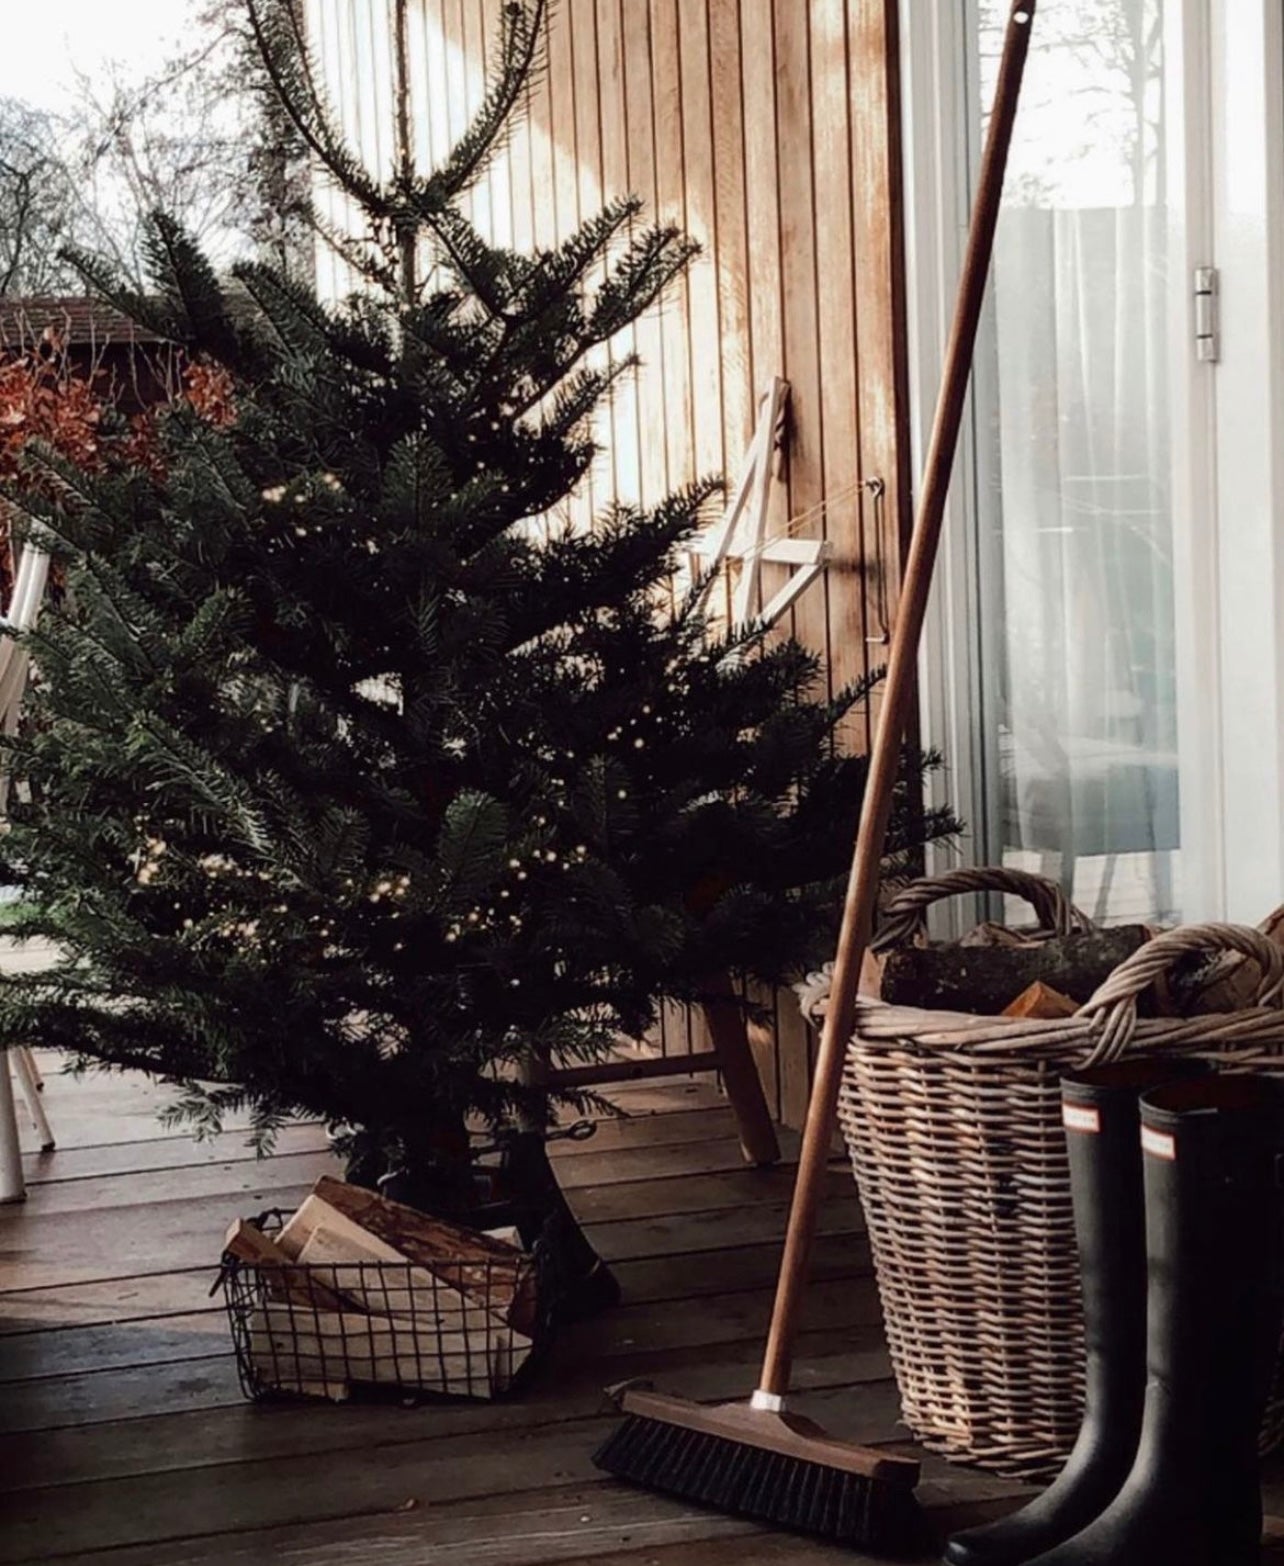 Dark Christmas tree next to leaning dark wooden broom with black bristles. Tall leather black boots sit next to a woven basket and dark wire basket holding firewood.